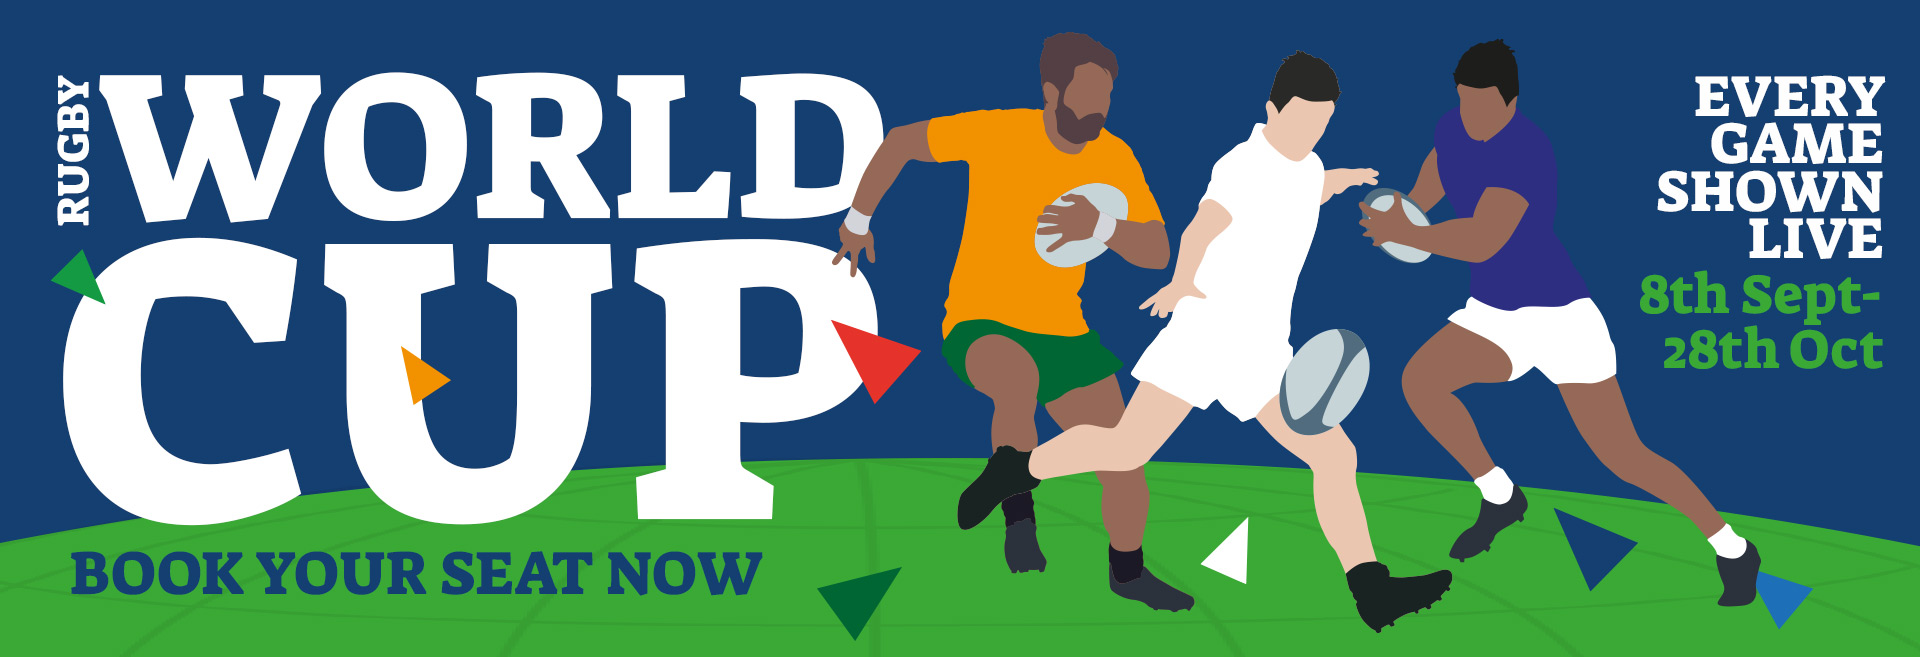 Watch the Rugby World Cup at The Angel